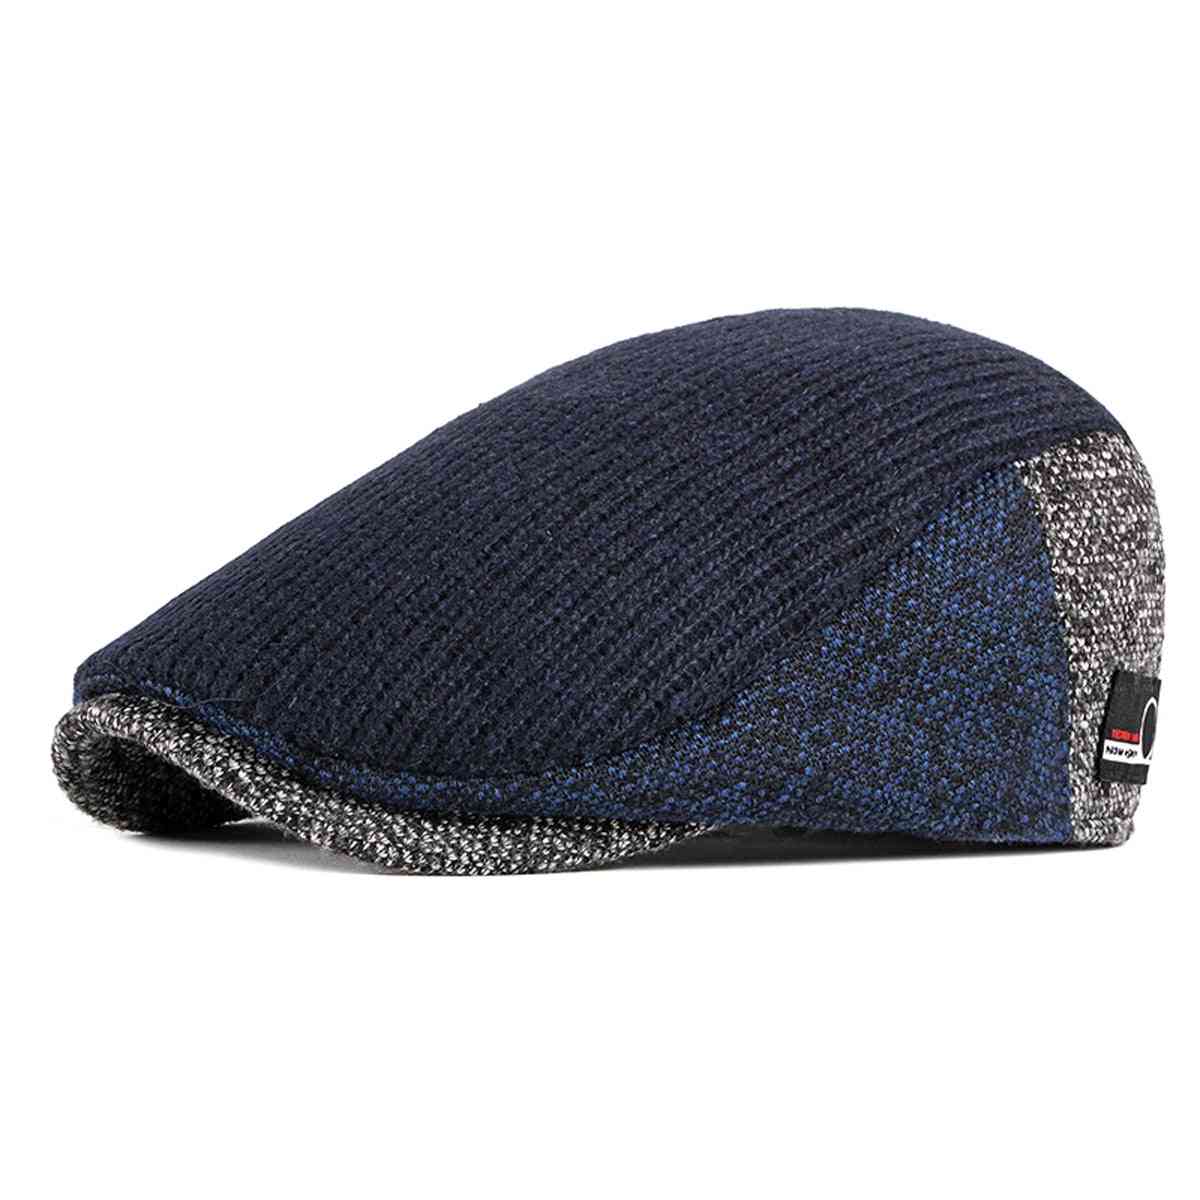 Fashion Men's Knitted Patchwork Flat Beret Hats